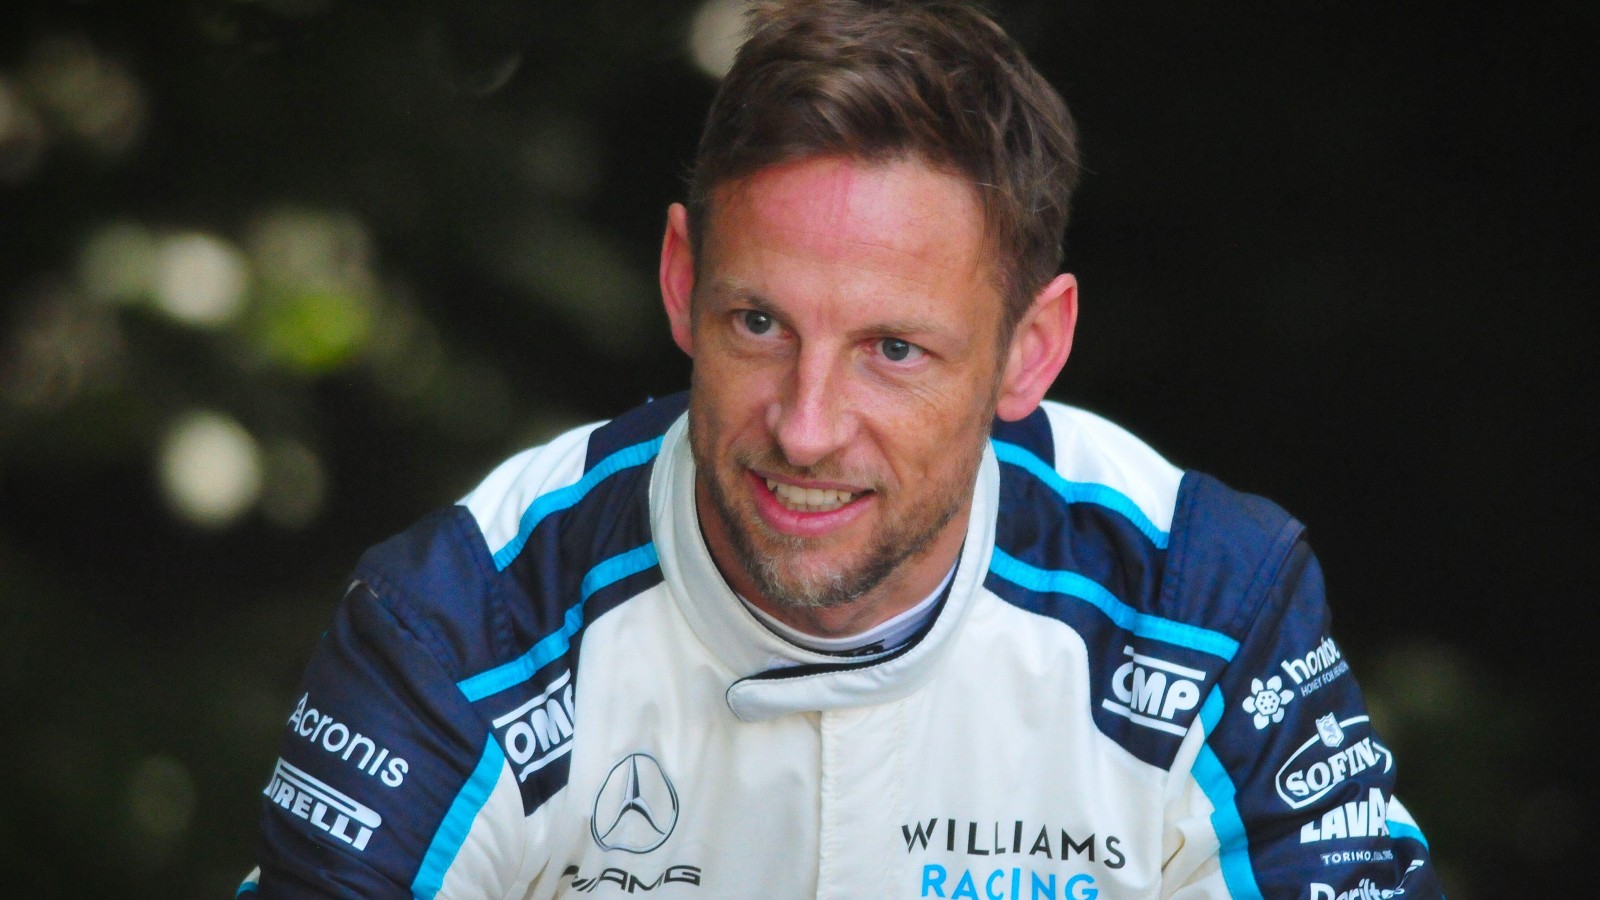 Jenson Button in a Williams race suit. England, July 2021.